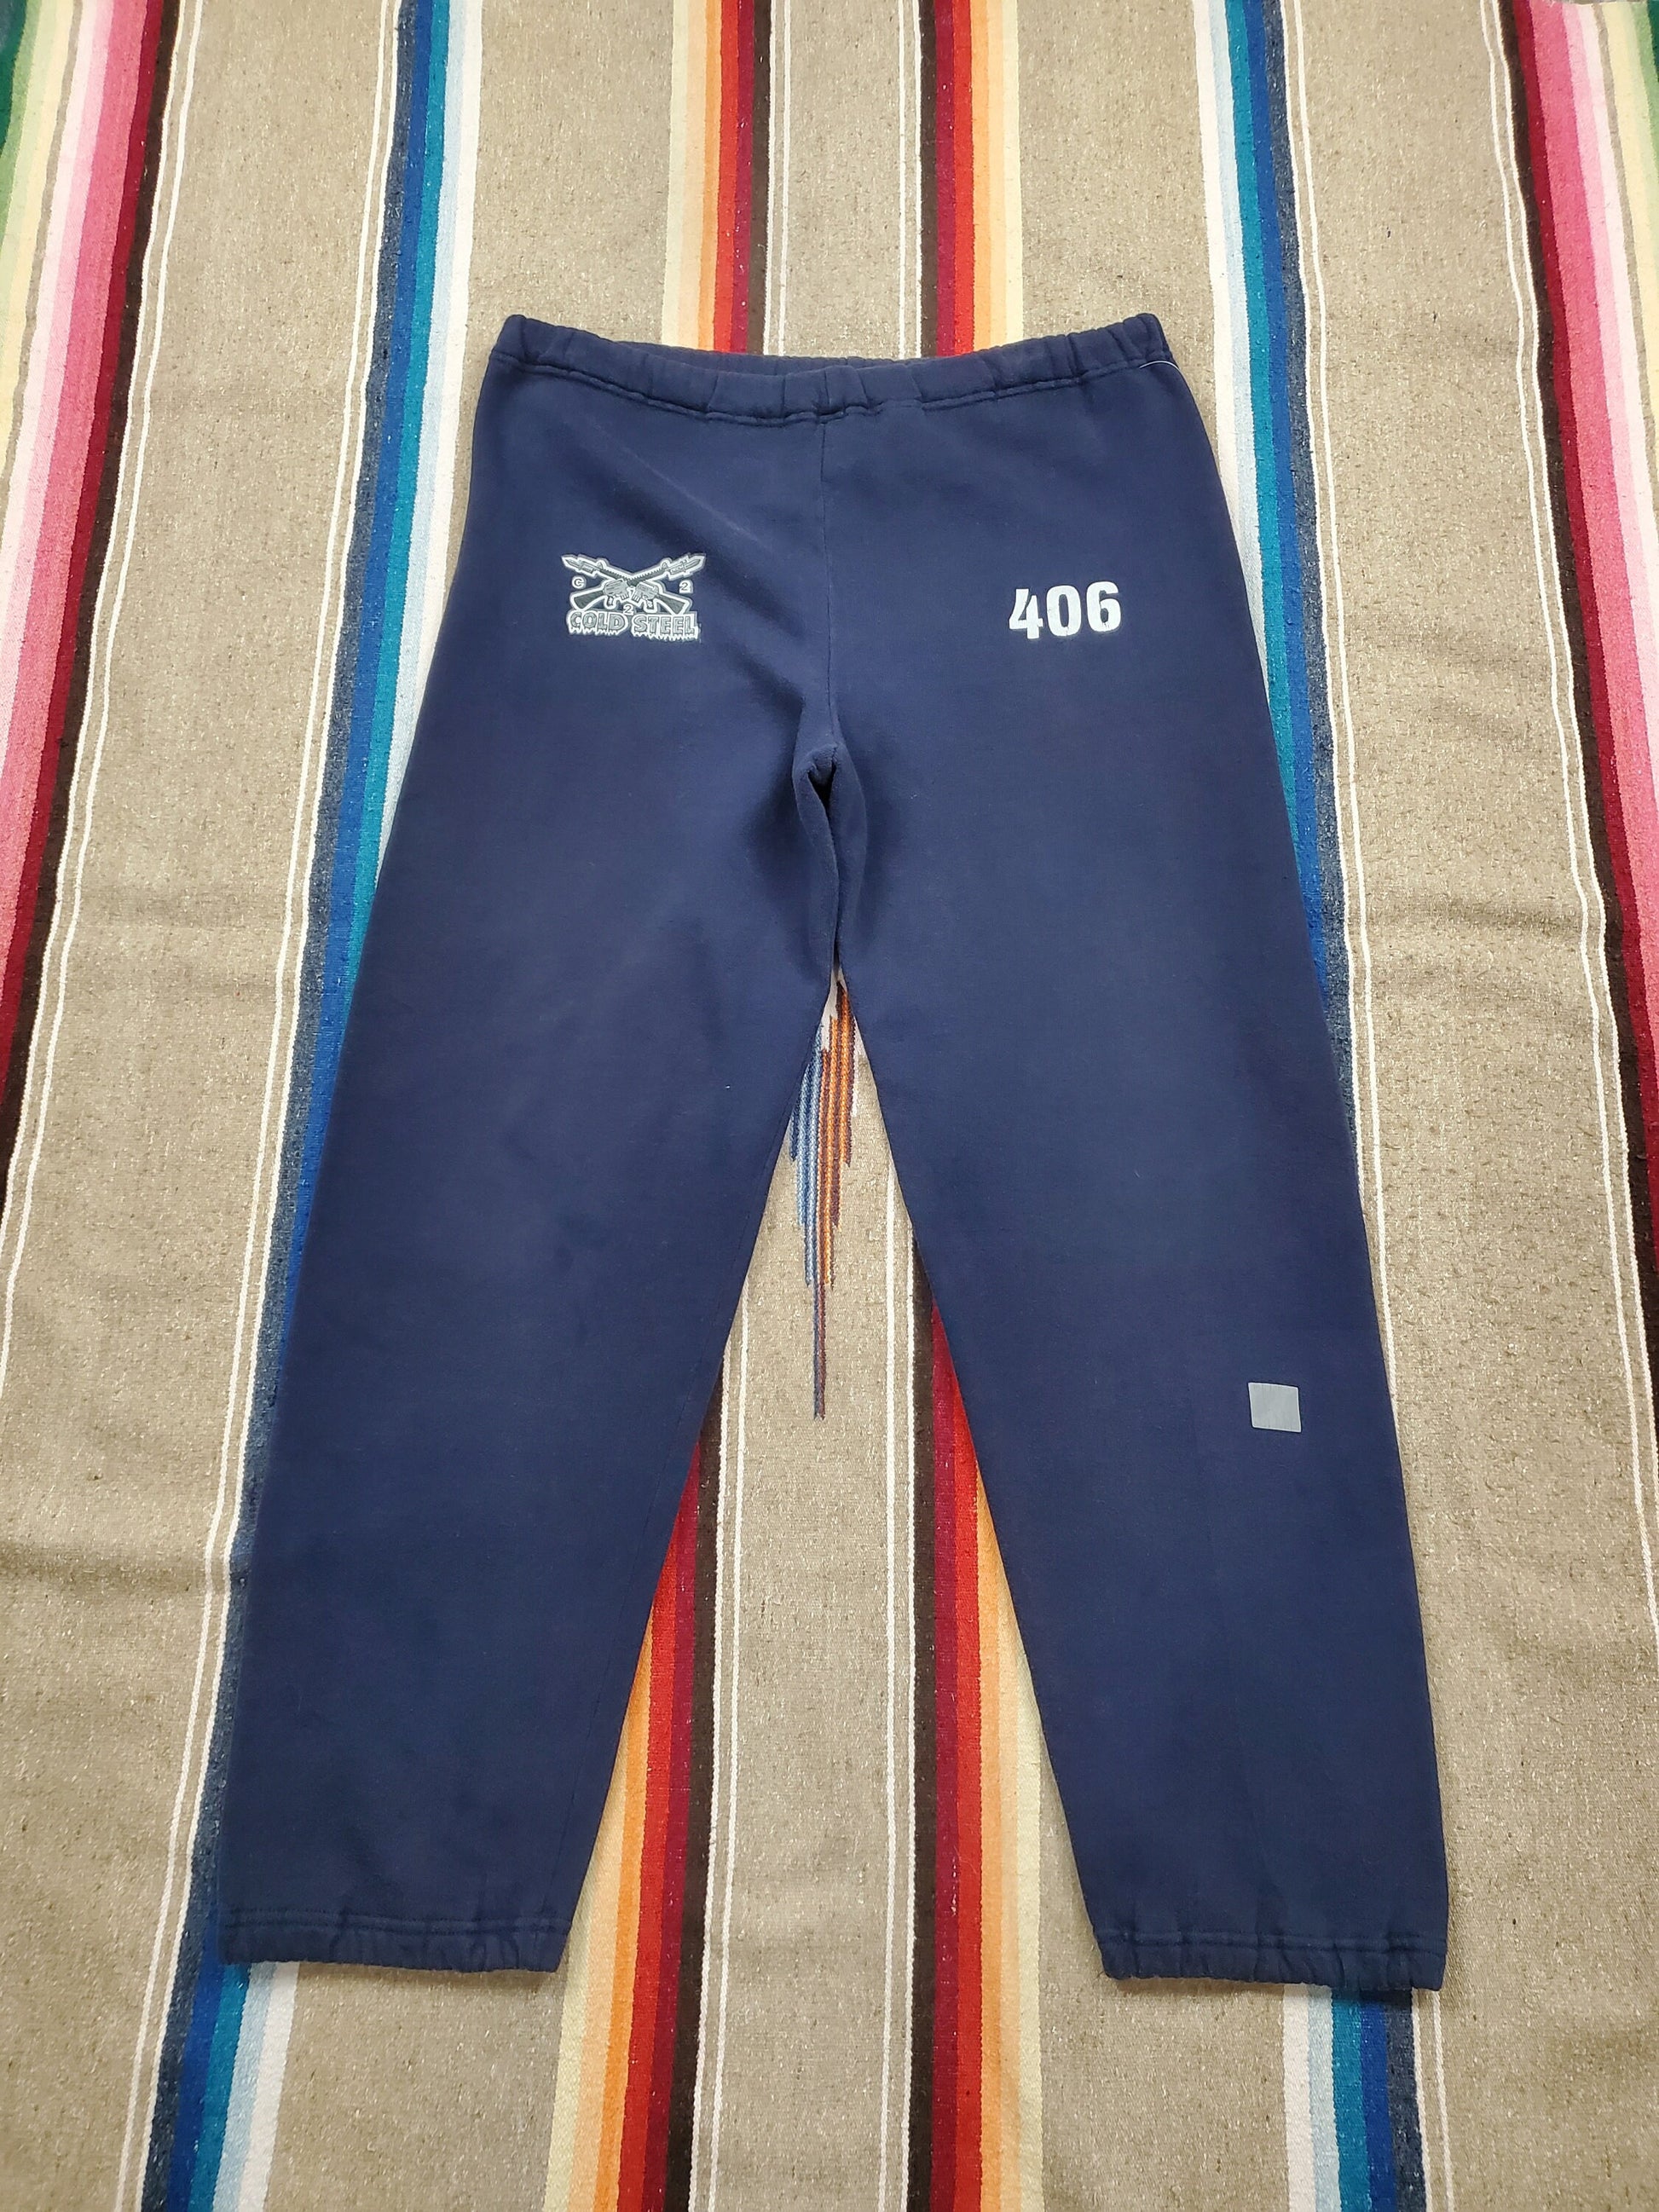 1980s Russell Athletic 82nd Airbrone All American Cold Steel Sweatpants Made in USA Size 32-38